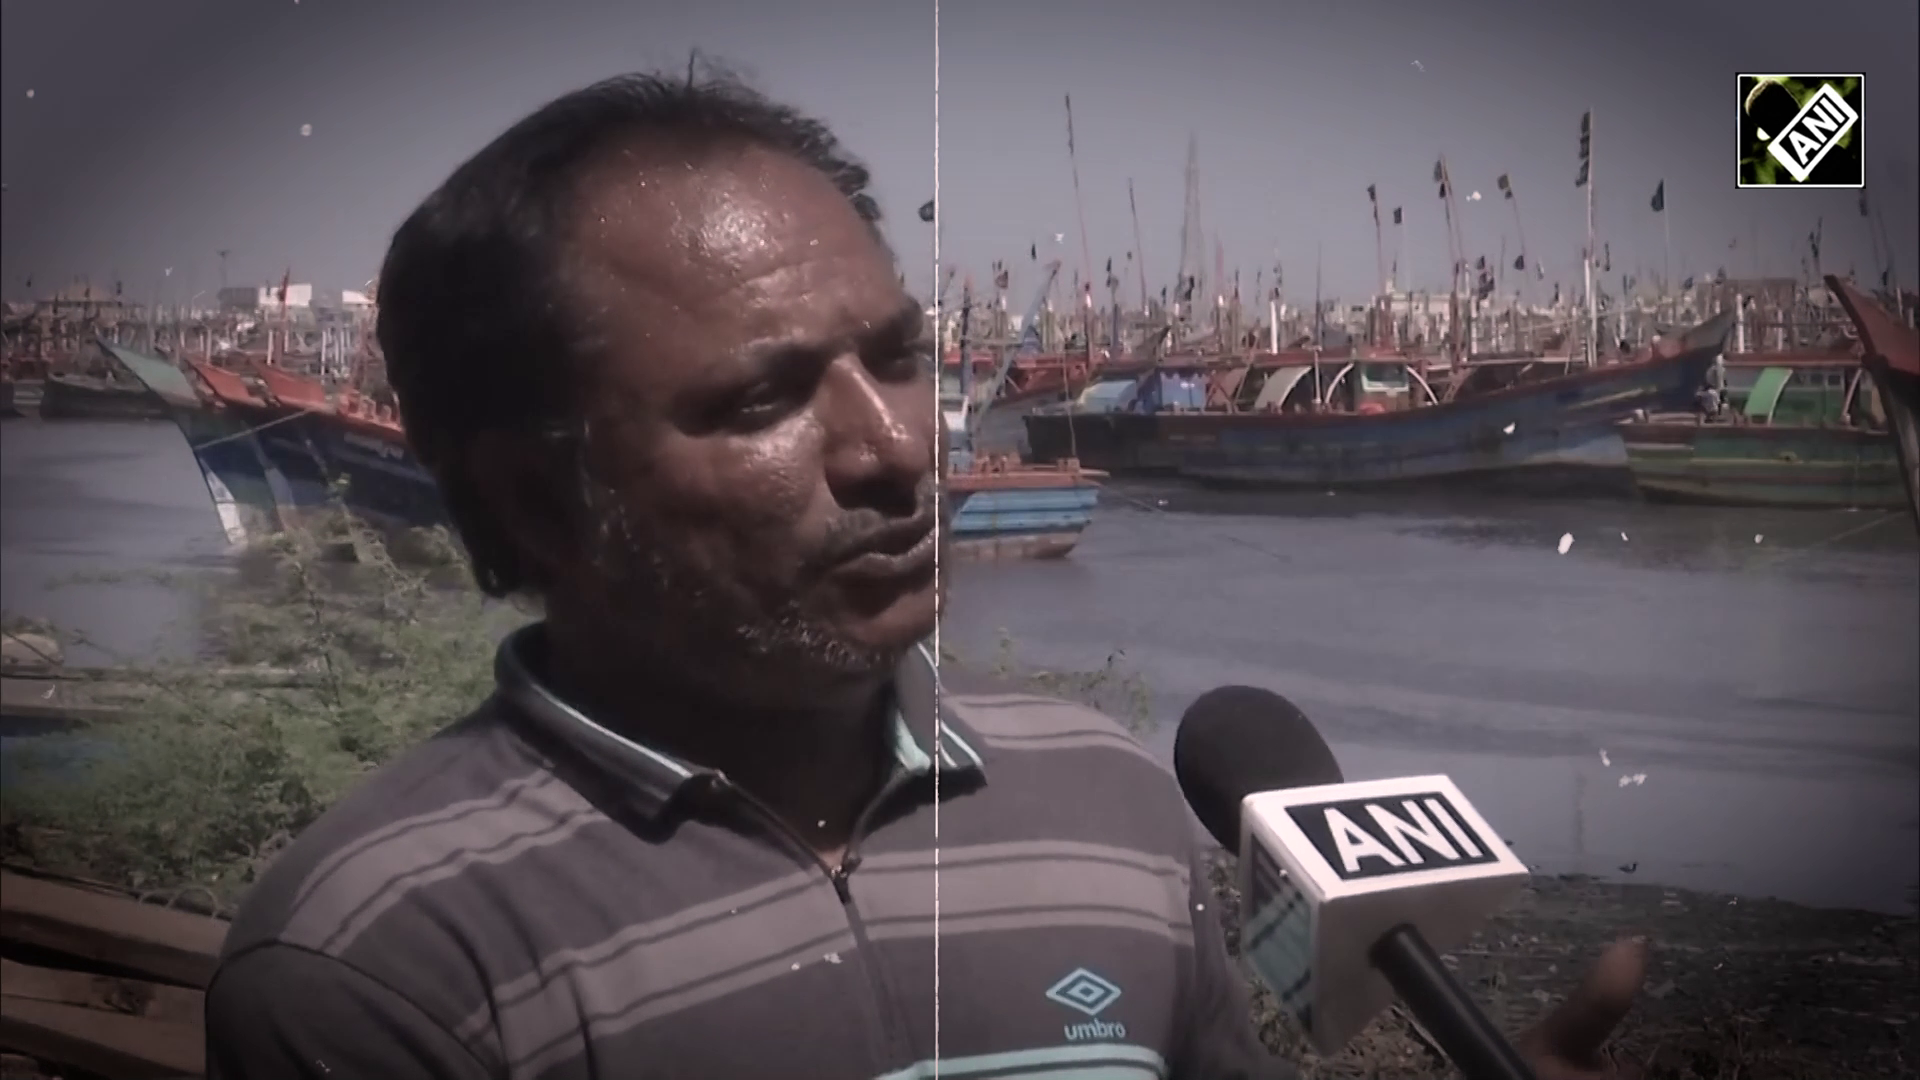 ‘Facing stiff competition from Pak fishermen,’ Veraval fish industry stakeholders demand reforms